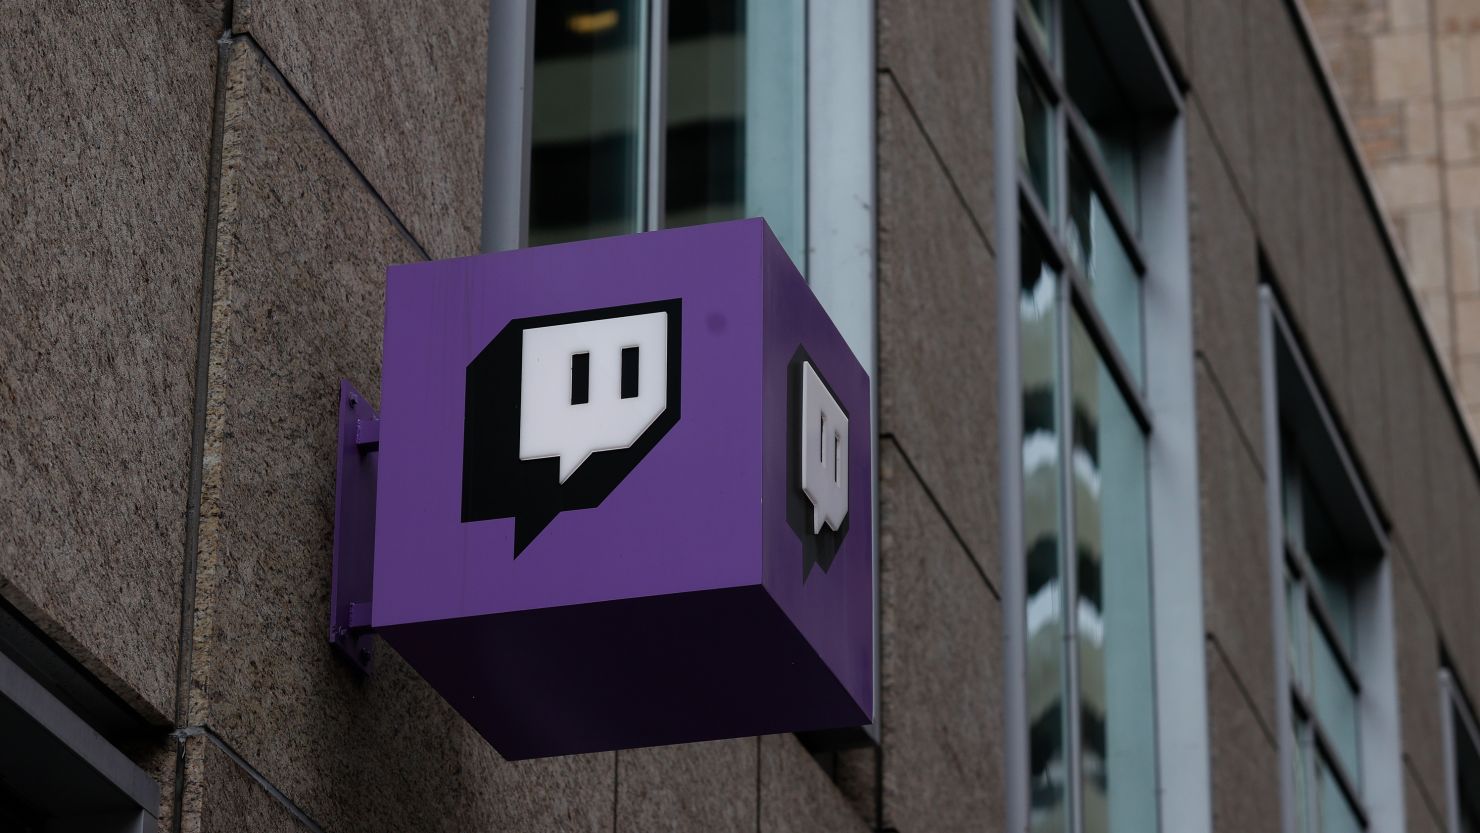 Twitch, an Amazon owned company, signage outside its headquarters, Tuesday, Dec. 26, 2023, in San Francisco. (Aaron M. Sprecher via AP)